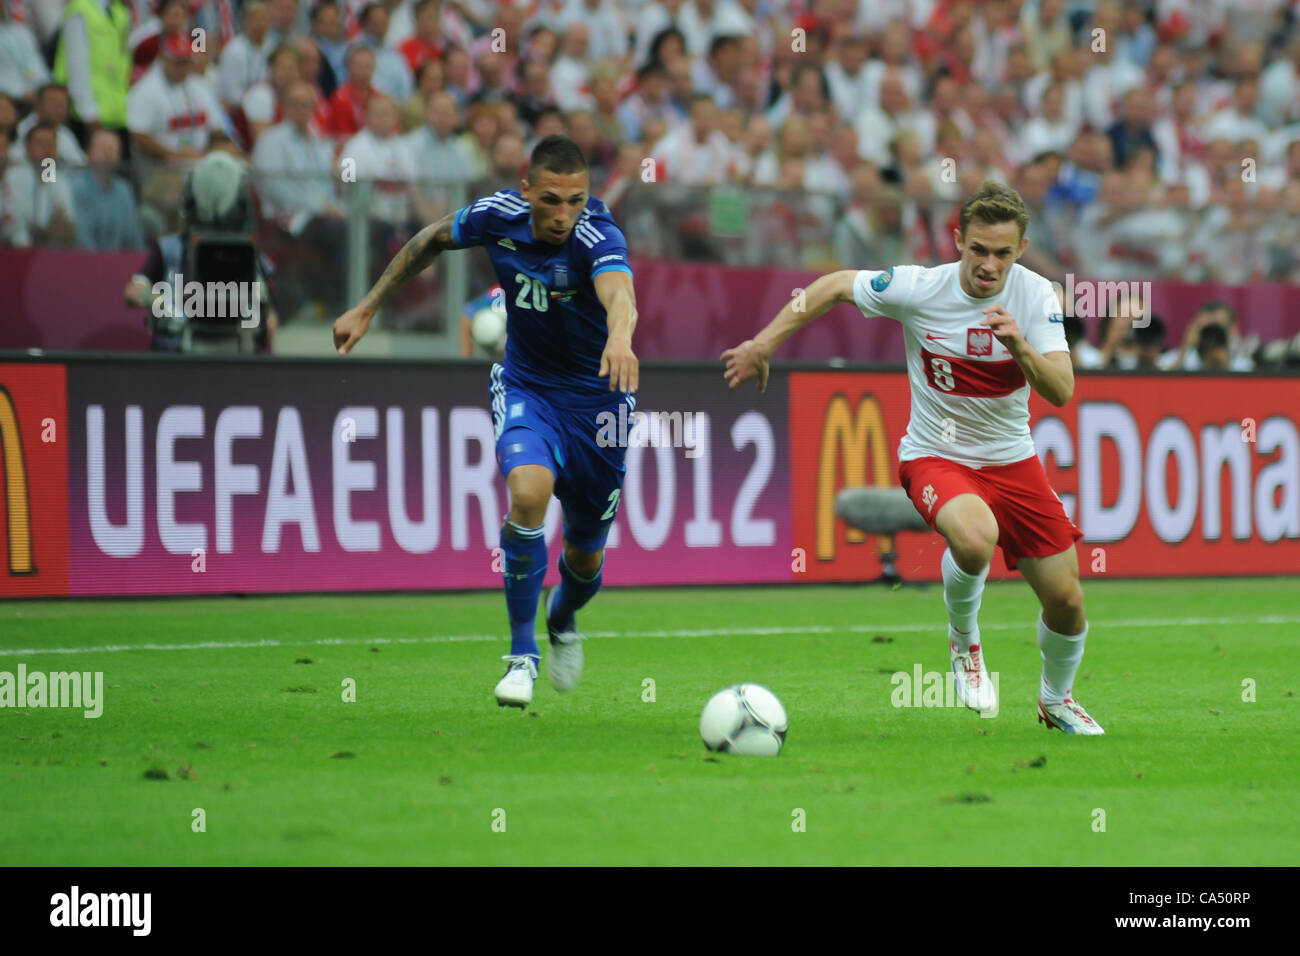 08.06.2012 Warsaw, Poland. Maciej Rybus (FC Terek Grozny)  Poland being tackled by Jose Holebas (Olympiacos FC) during the European Championship Group A game between Poland and Greece from the National Stadium. Stock Photo